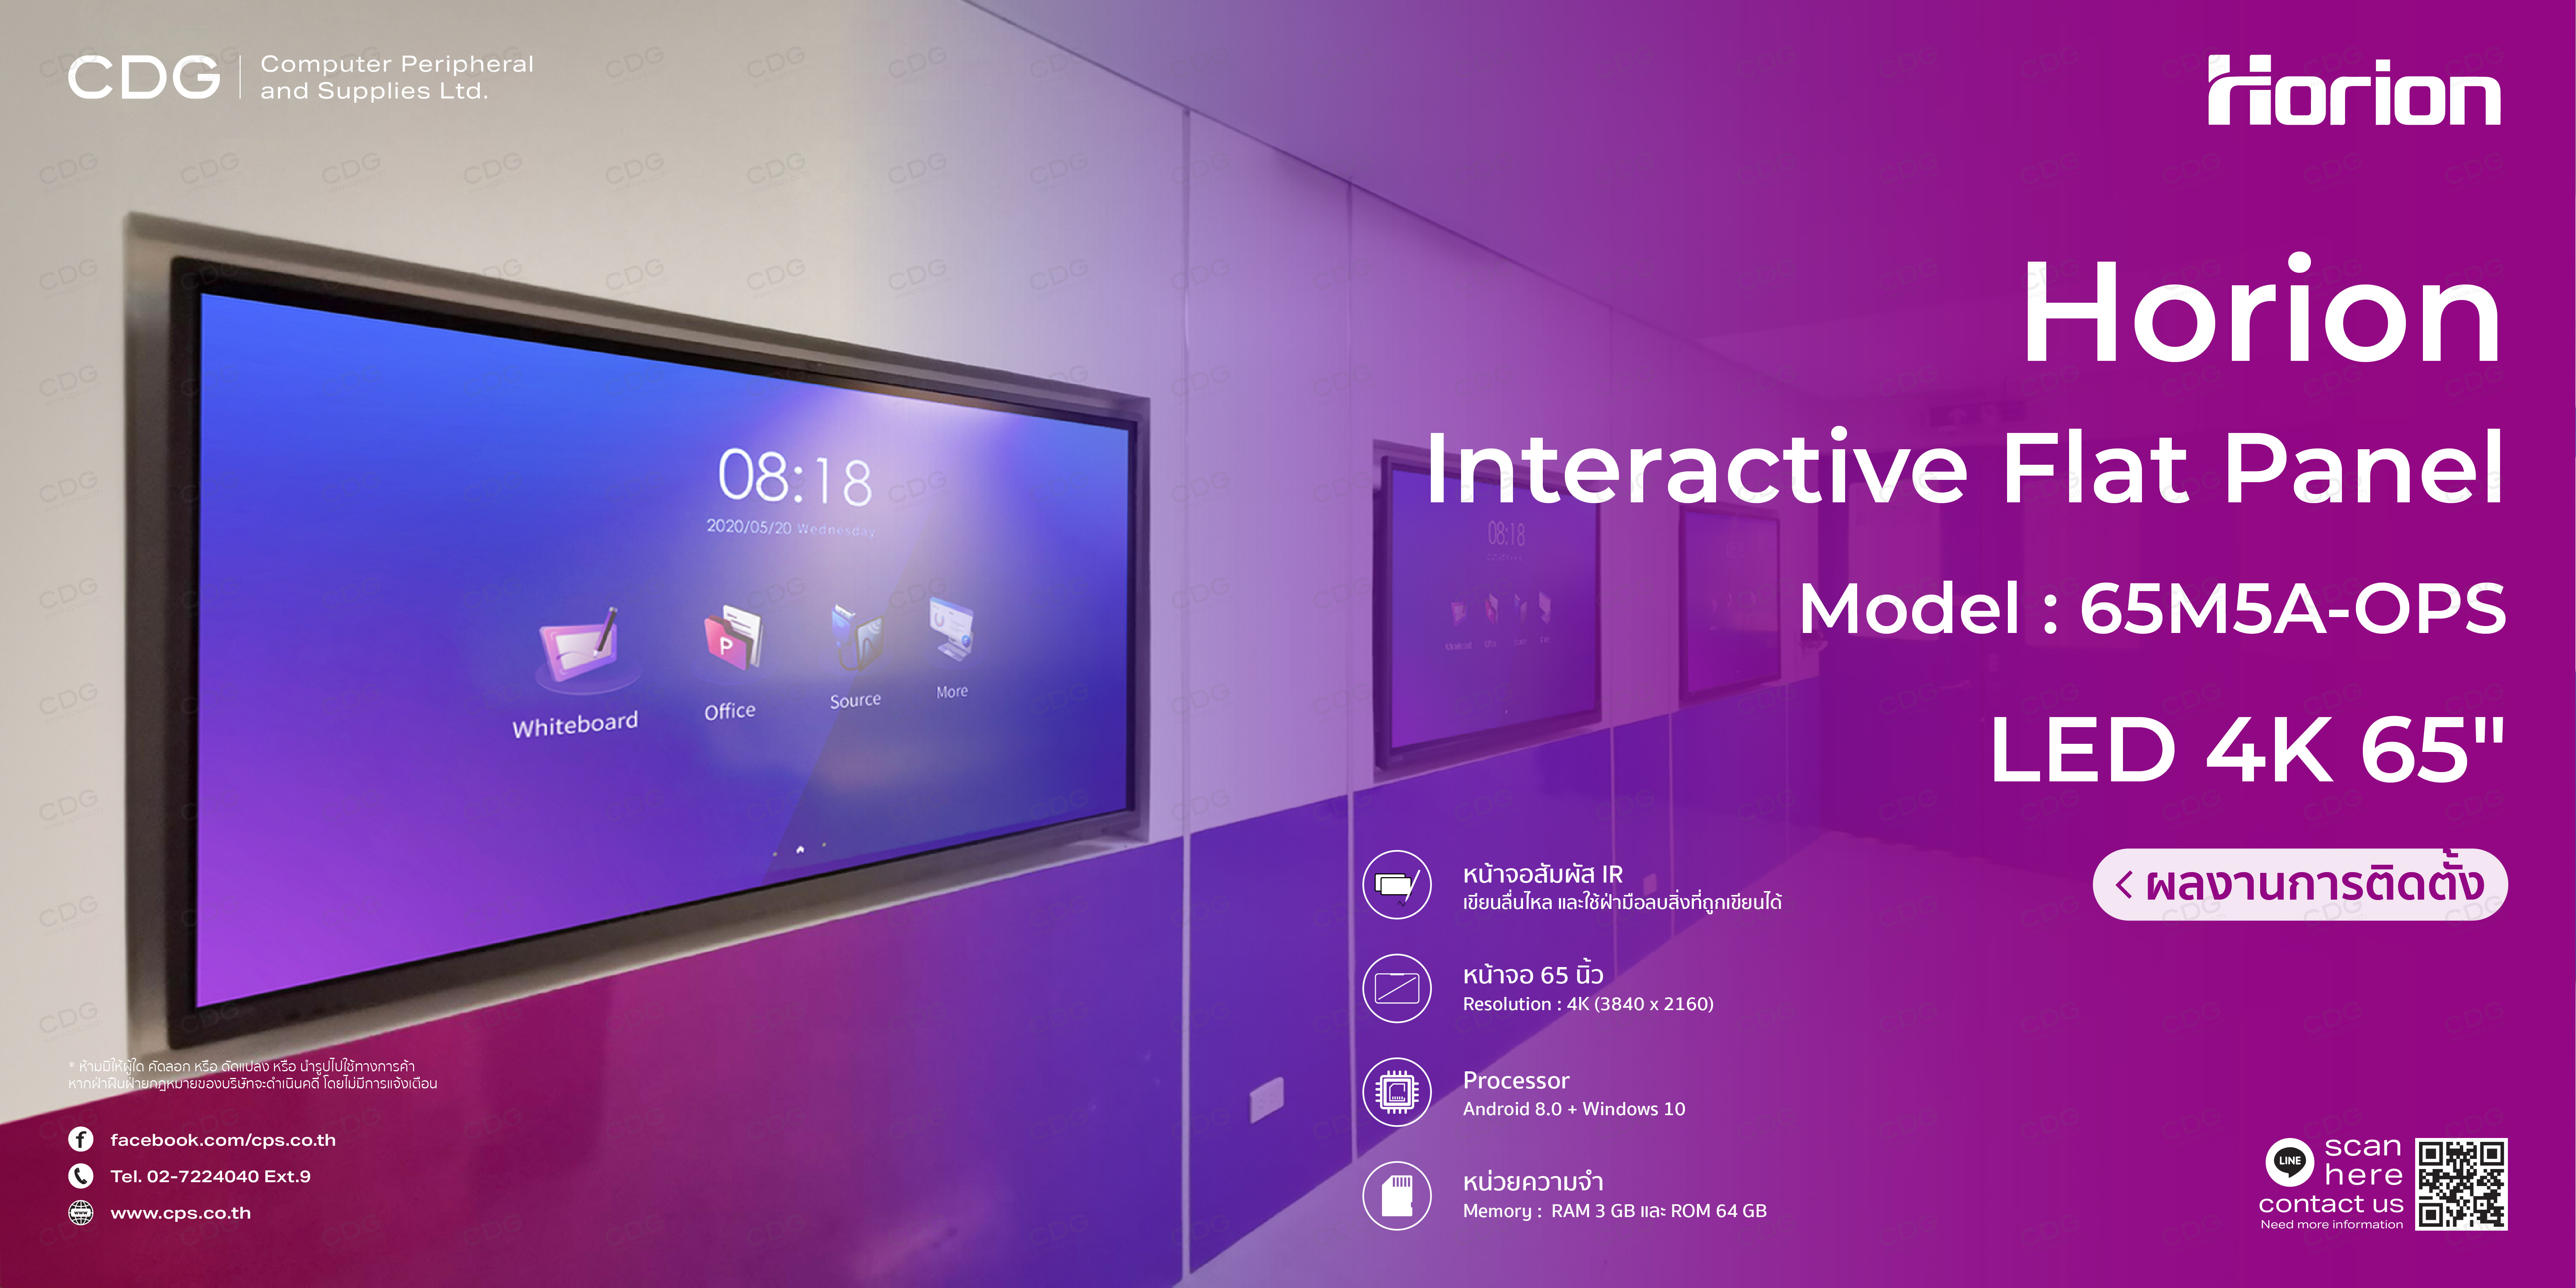 Horion 65M5A-OPS Interactive Flat Panel